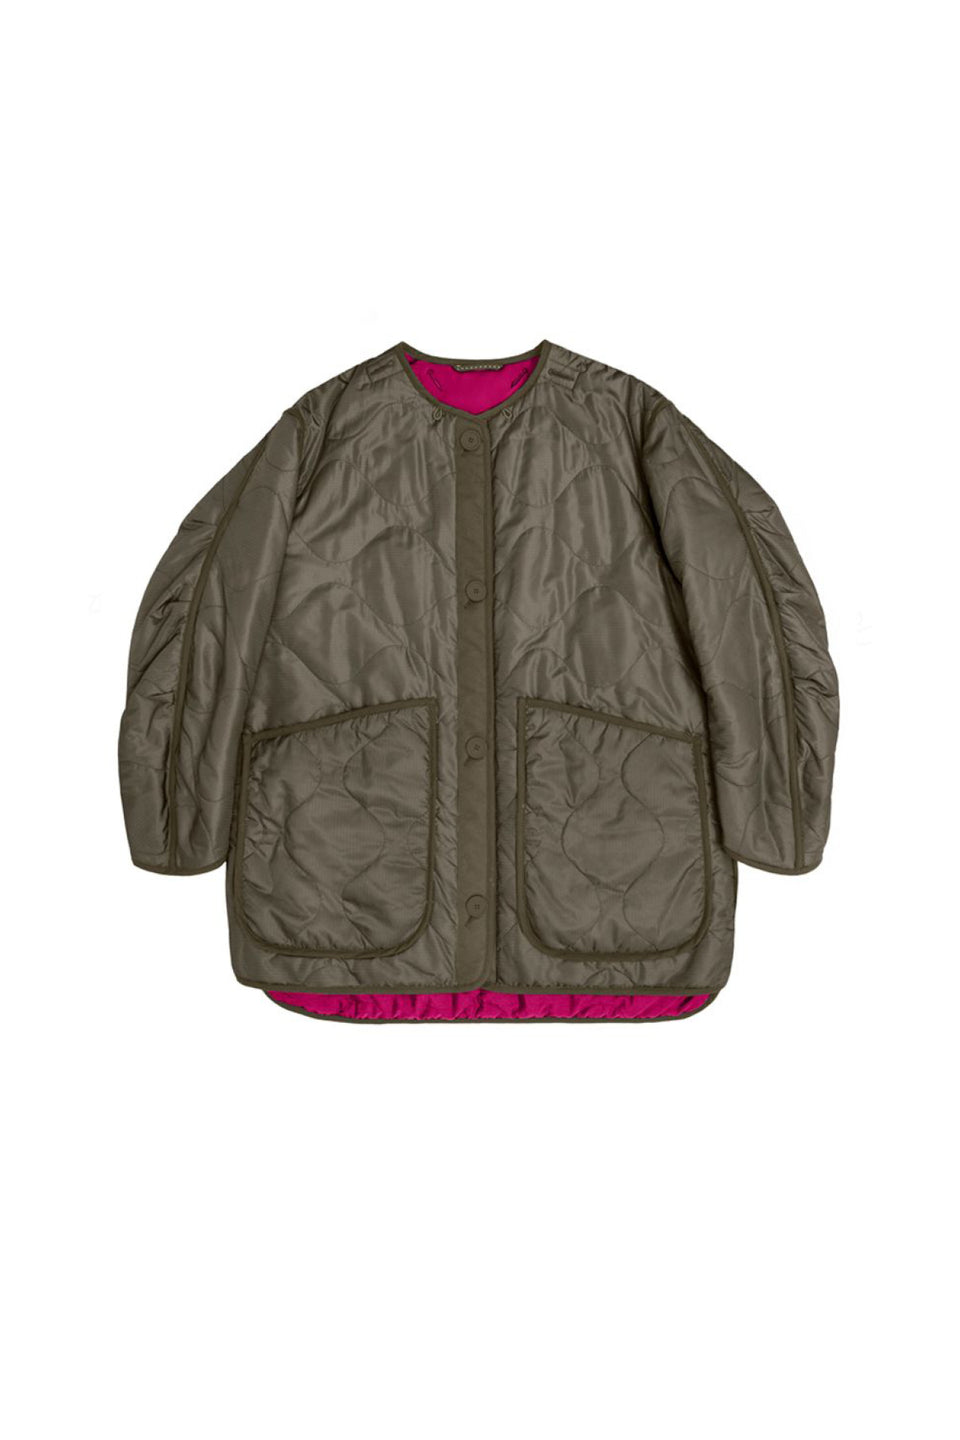 Cropped Quilt Jacket - Dark Olive / Fuchsia (listing page thumbnail)